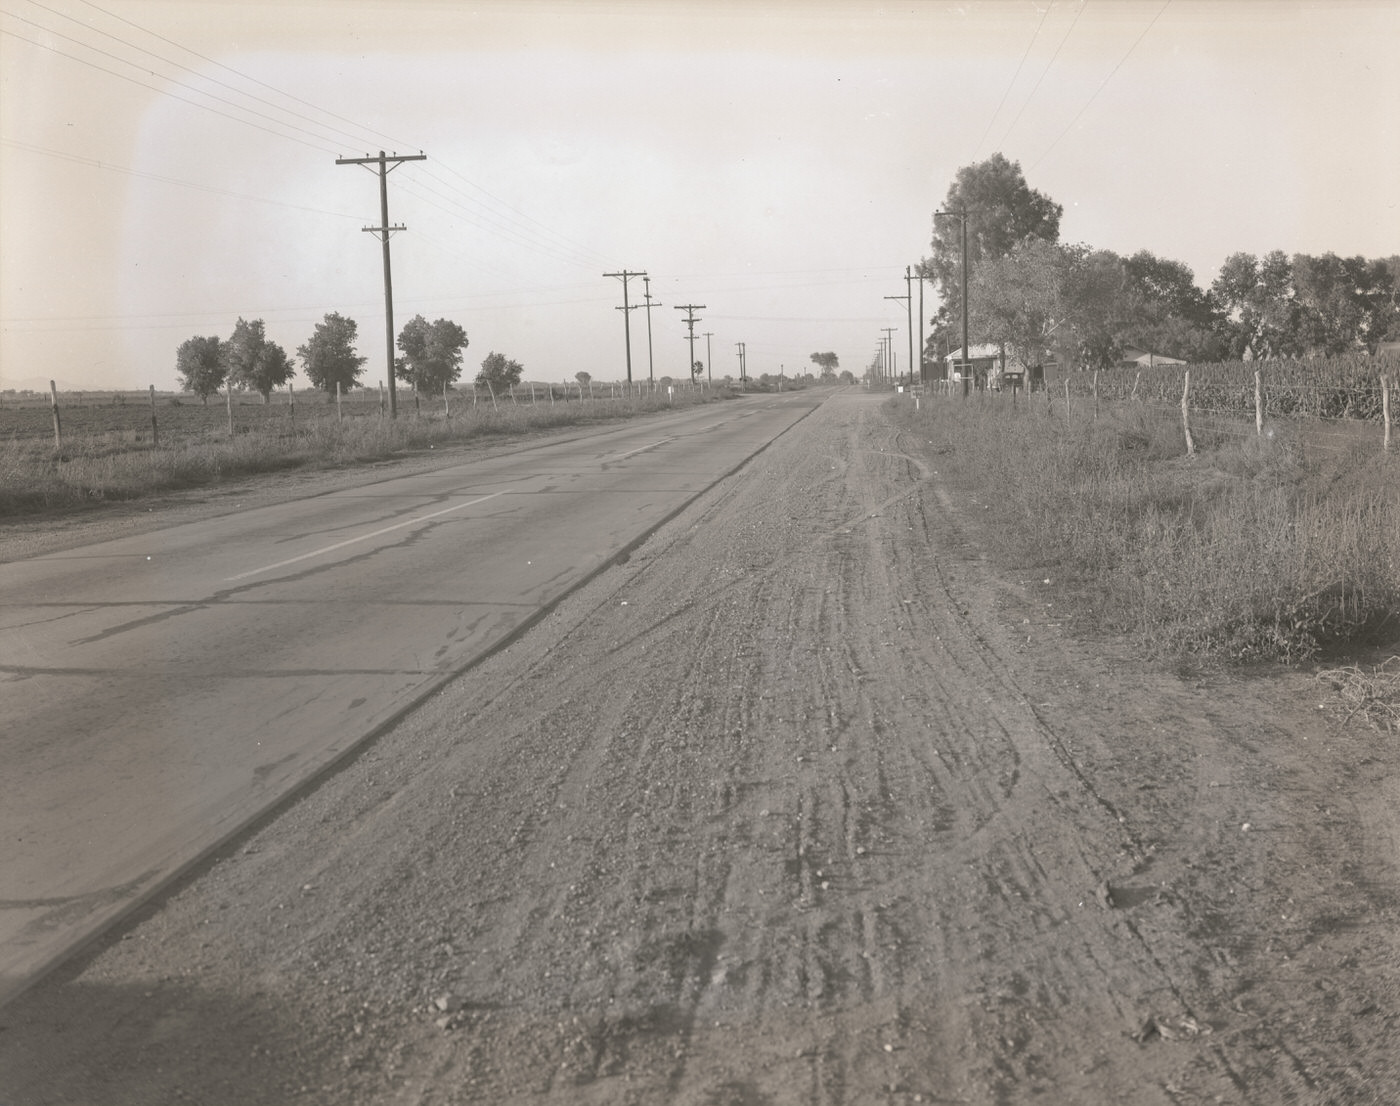 Rural Intersection, 1930s